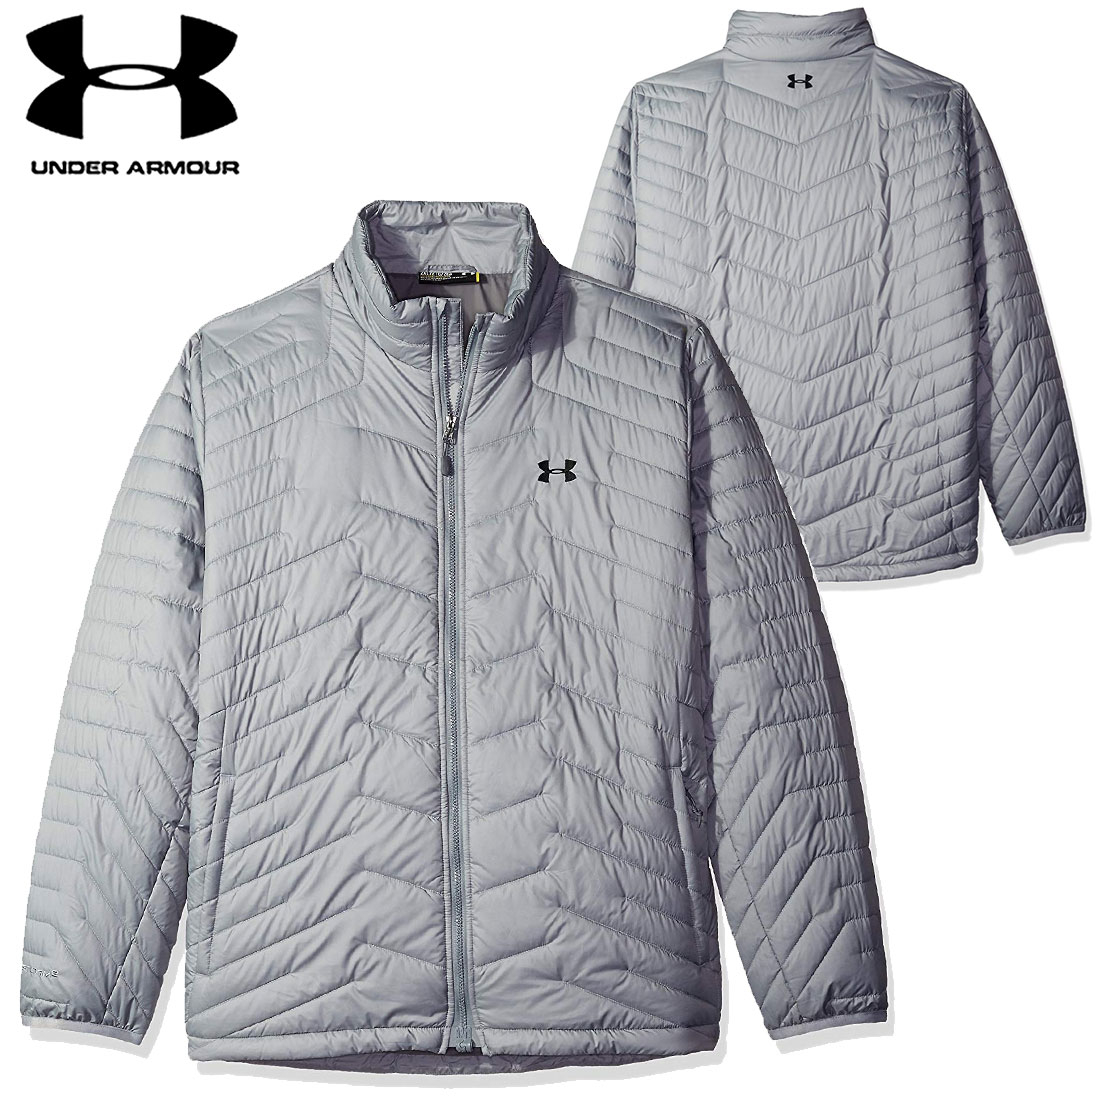 under armour coldgear reactor insulated jacket